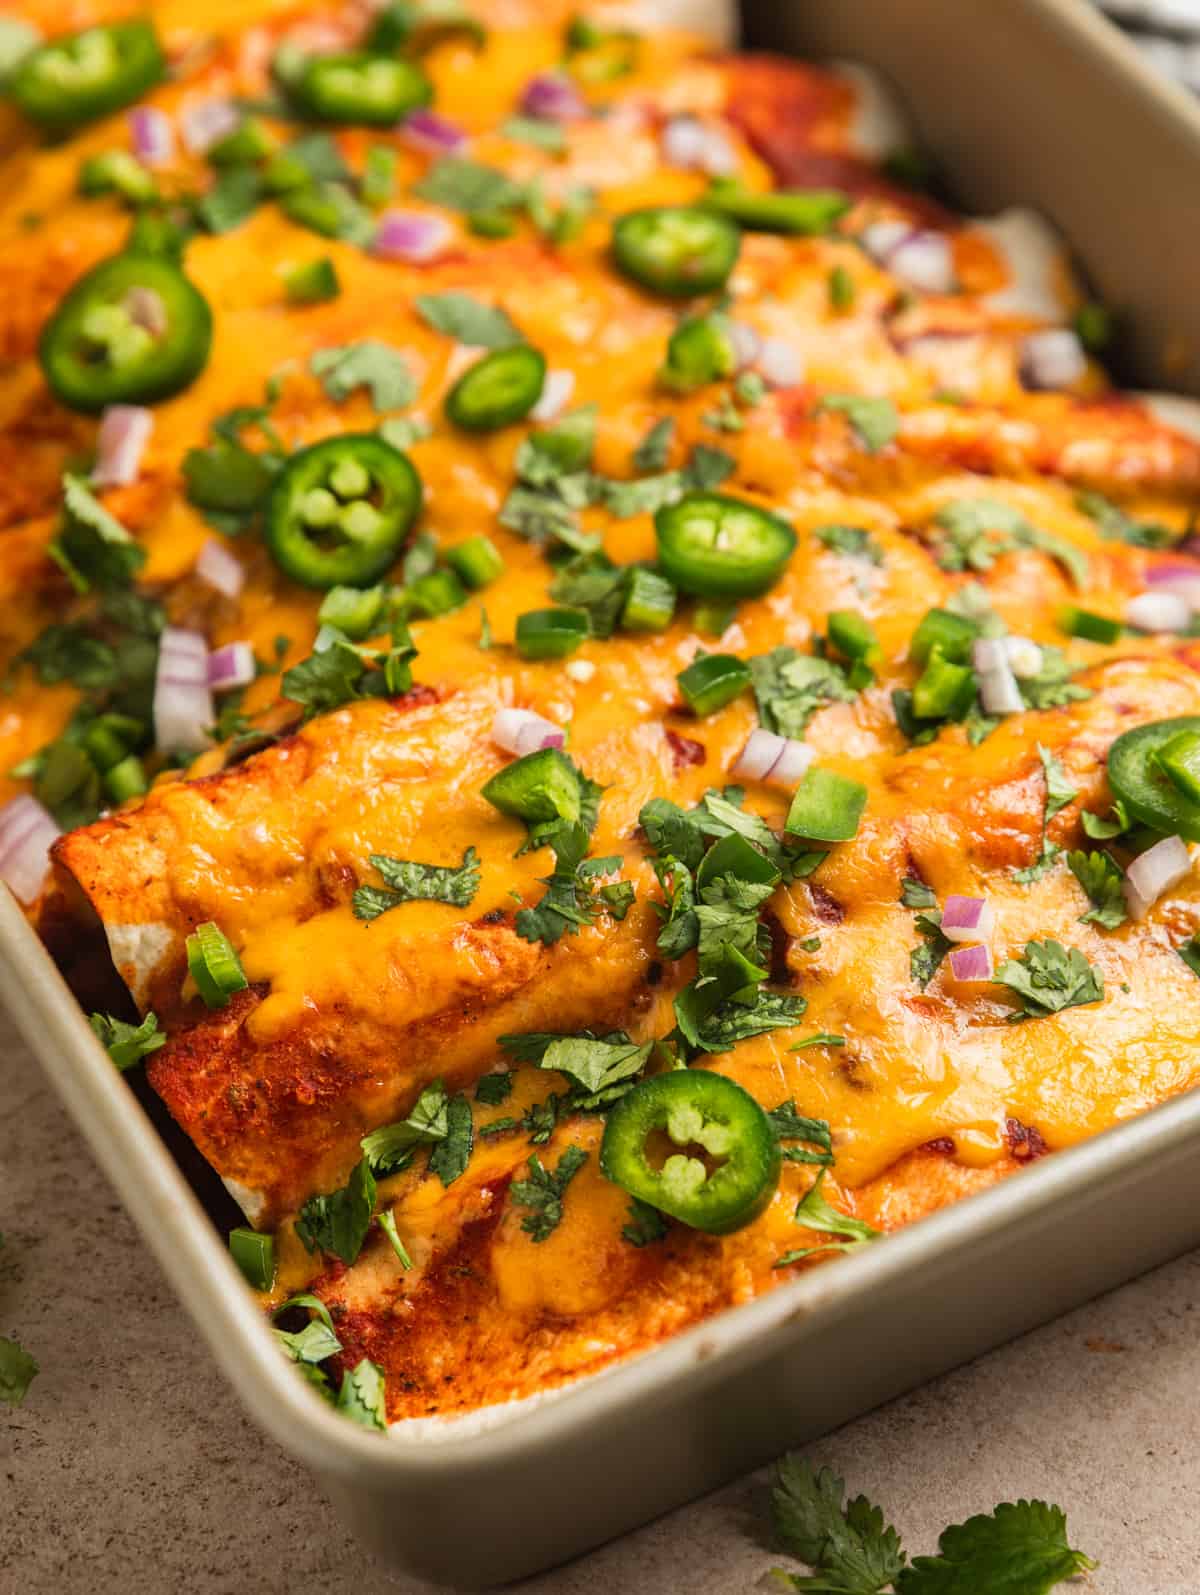 Enchiladas in pan topped with melted cheese and other toppings.